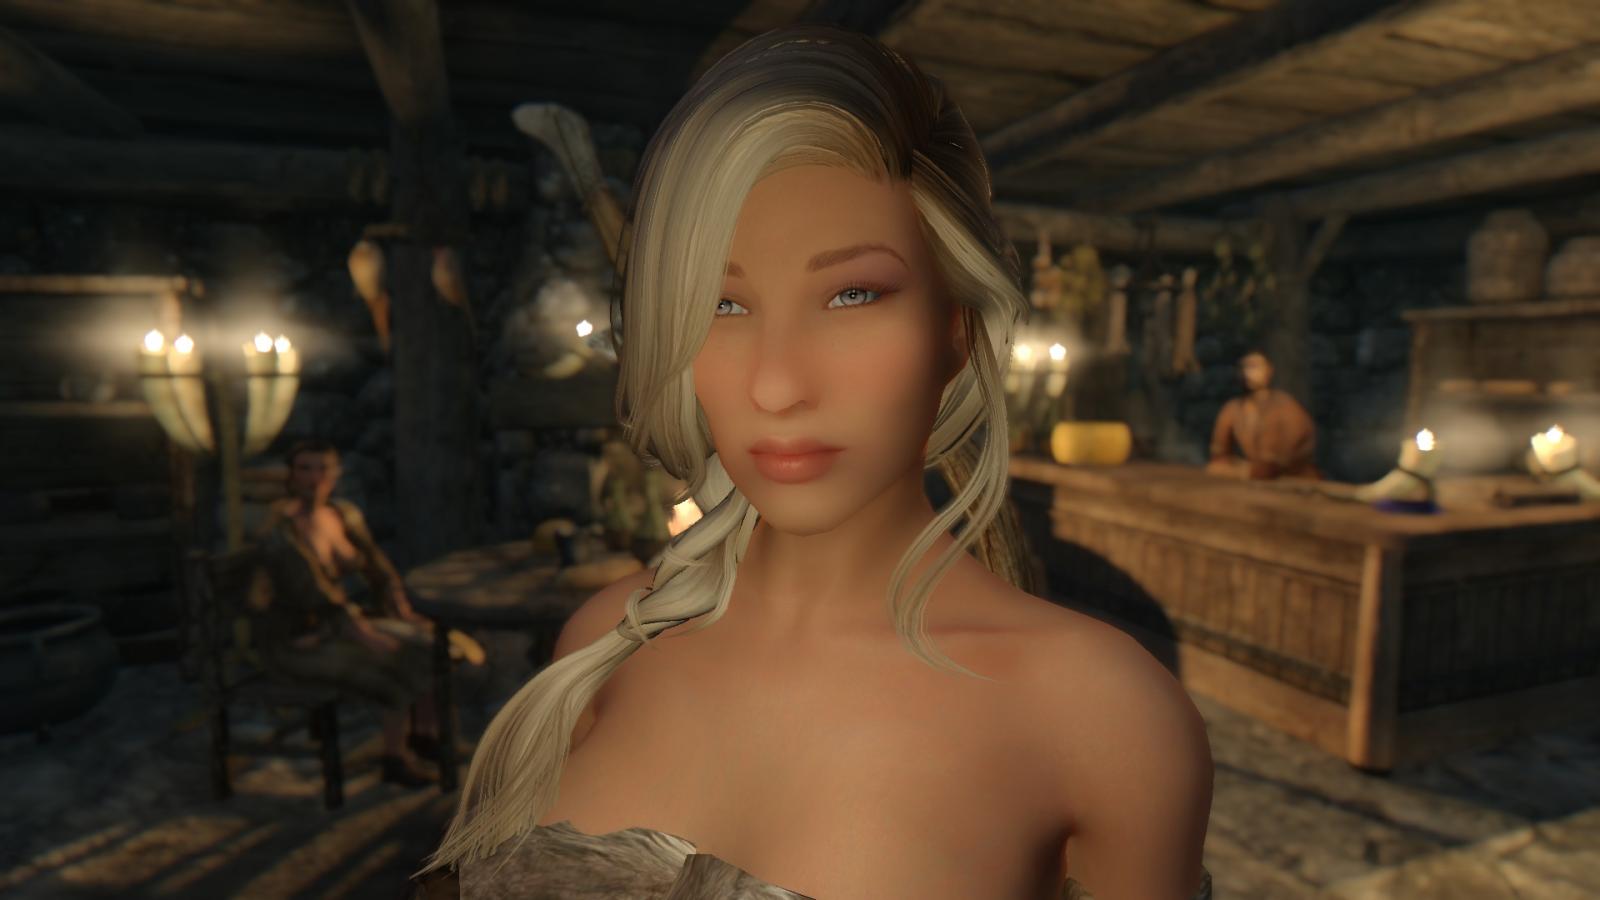 Oh la, la.. Anatriax's character from the Skyrim immersive test dev capture